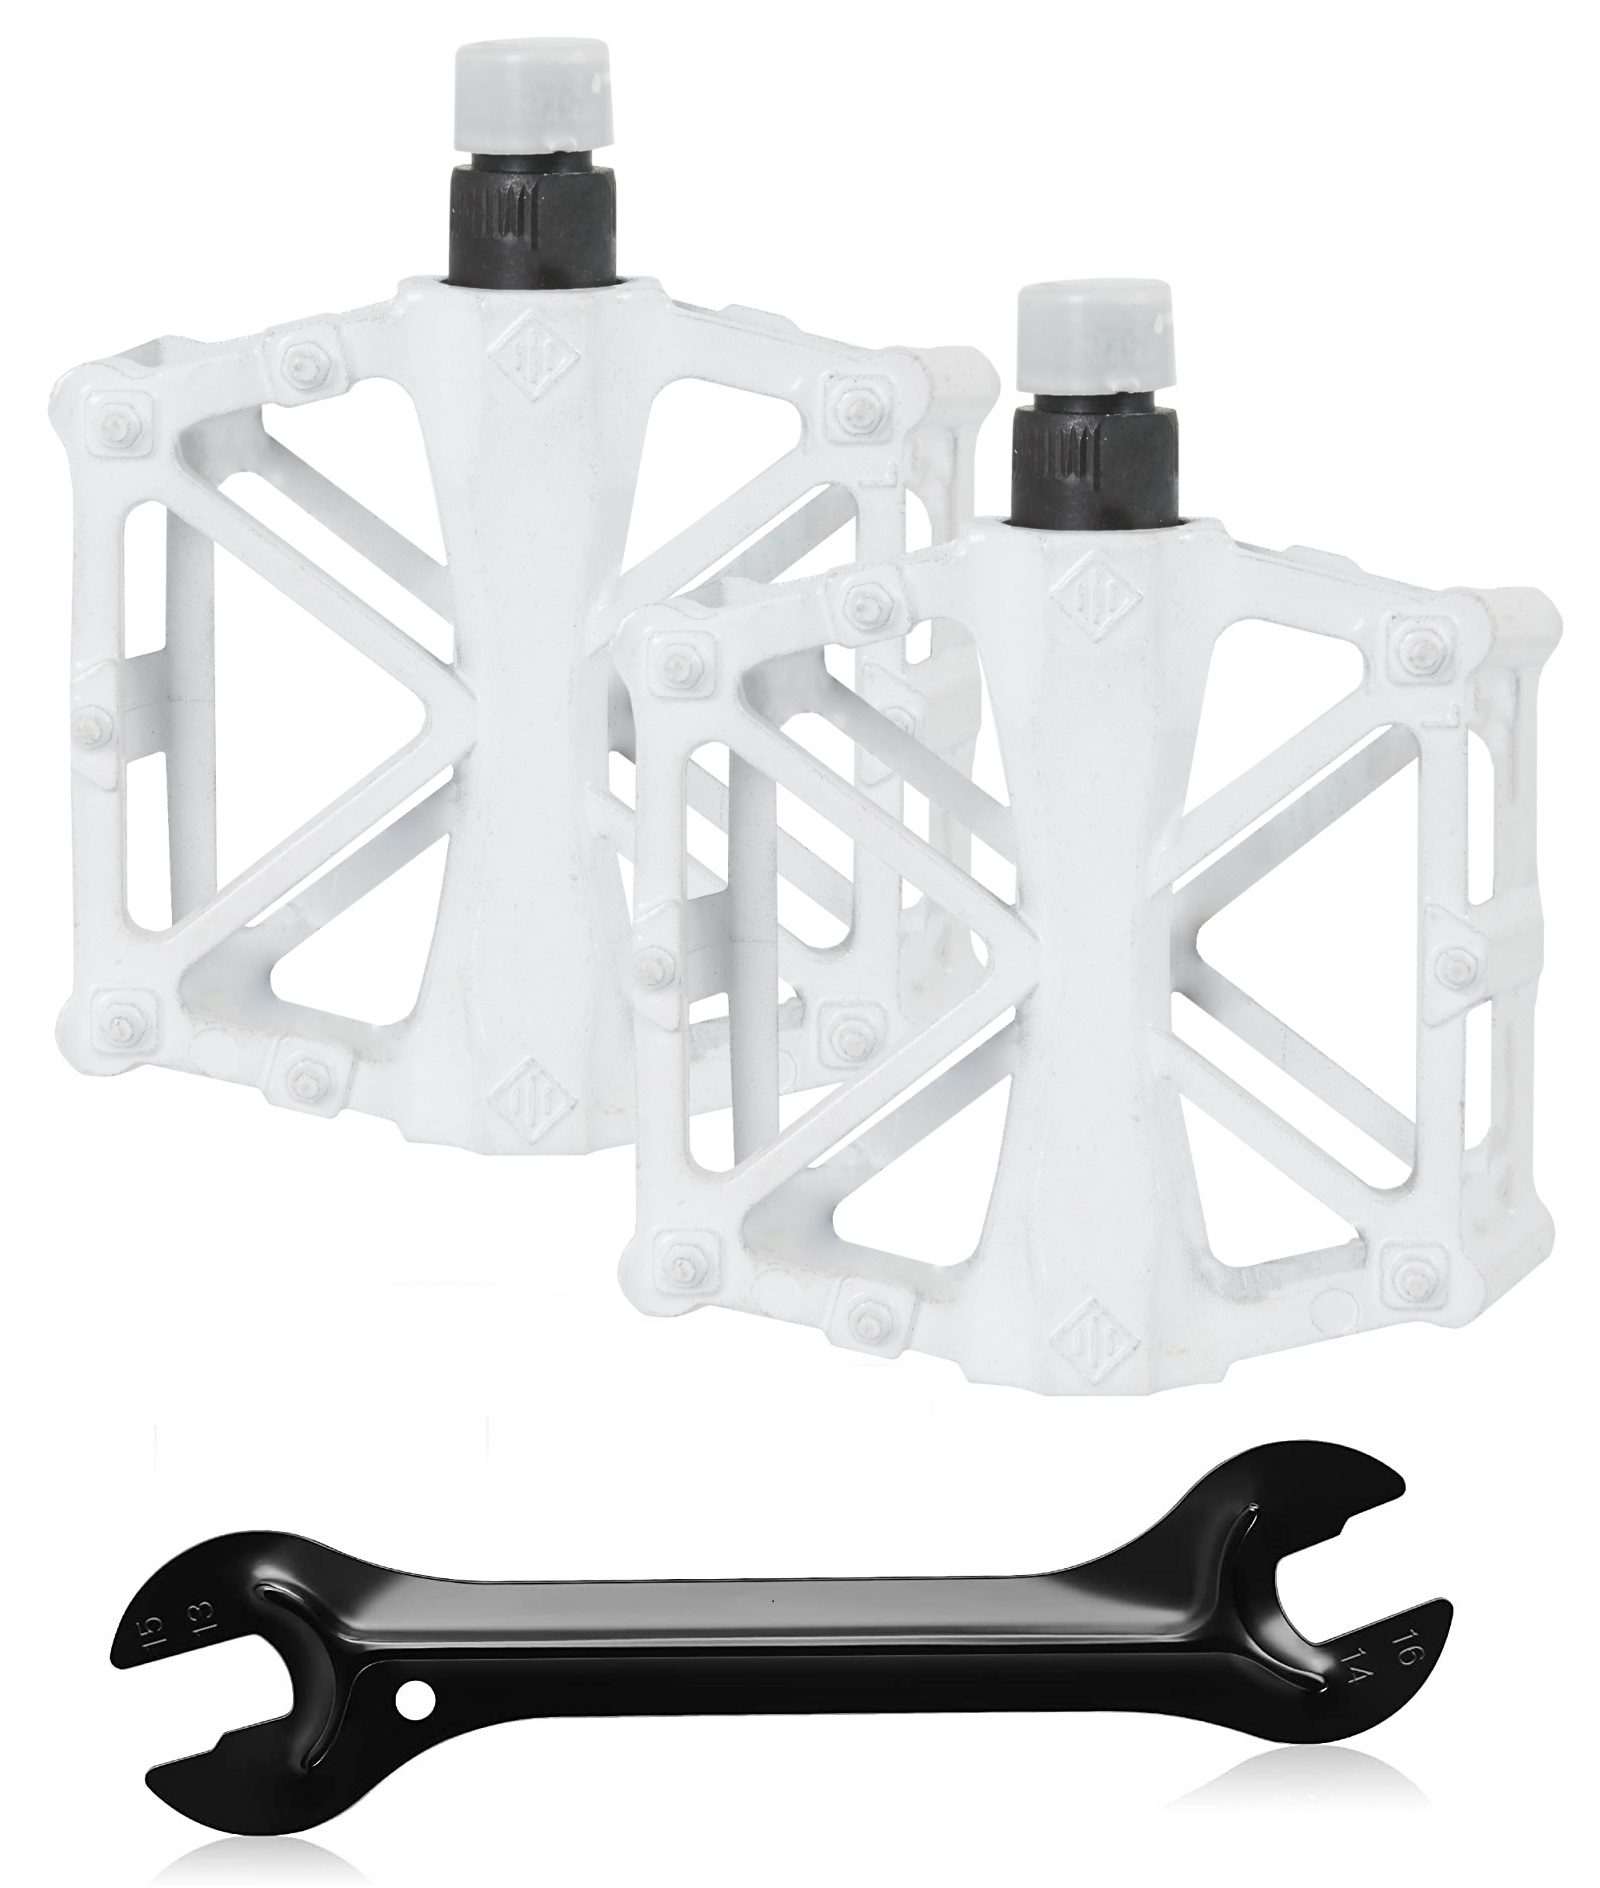 9/16” White Pair Of Bicycle Mountain Bike MTB BMX Cycling Bearing Alloy Flat Platform Pedals With Wrench